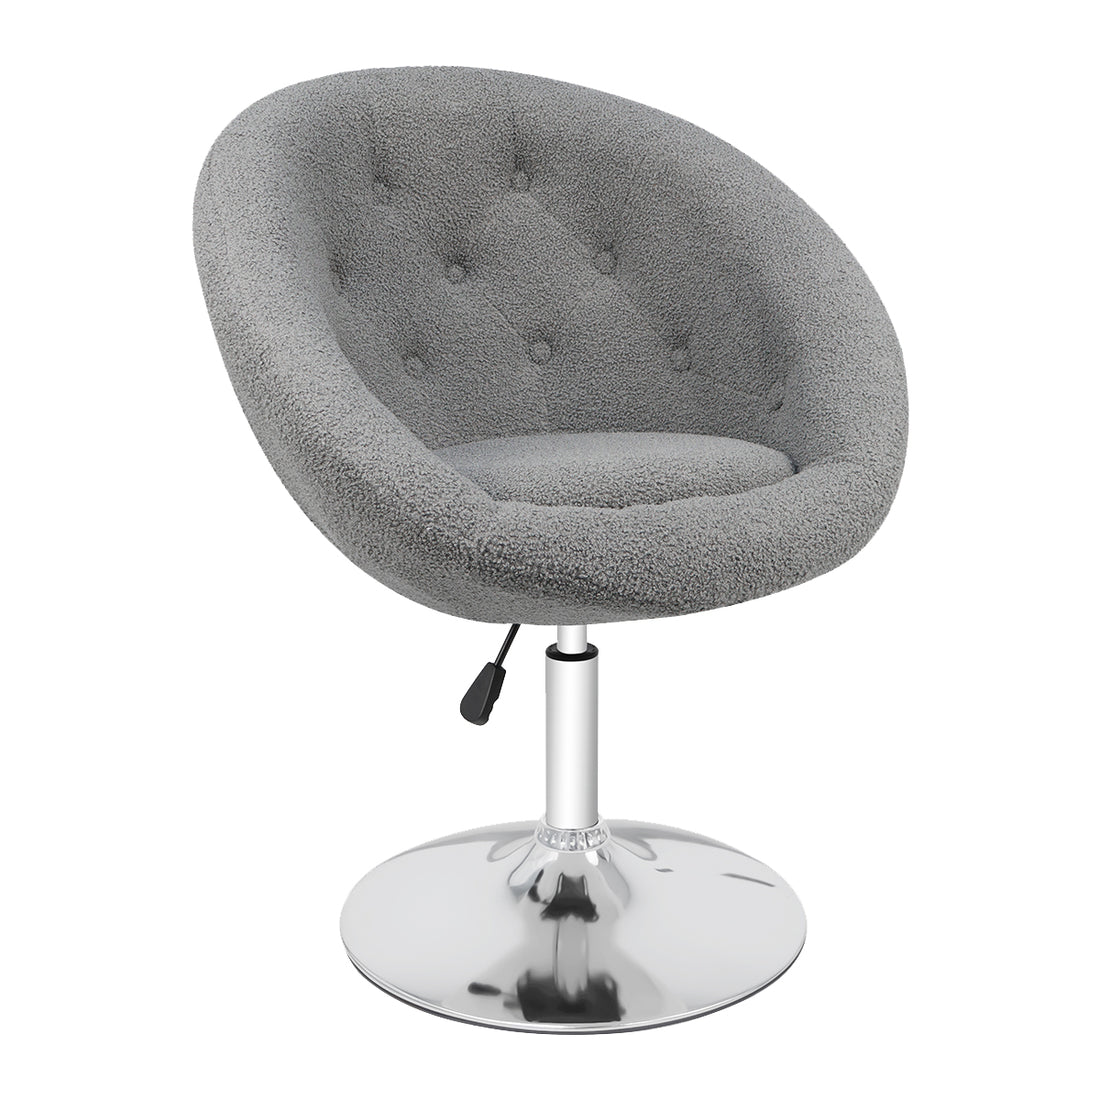 Impressions Michelle Tufted Vanity Chair with 360 Degree Swivel, Button Design Desk Seat with Five Non Marking Caste (Cool Gray)